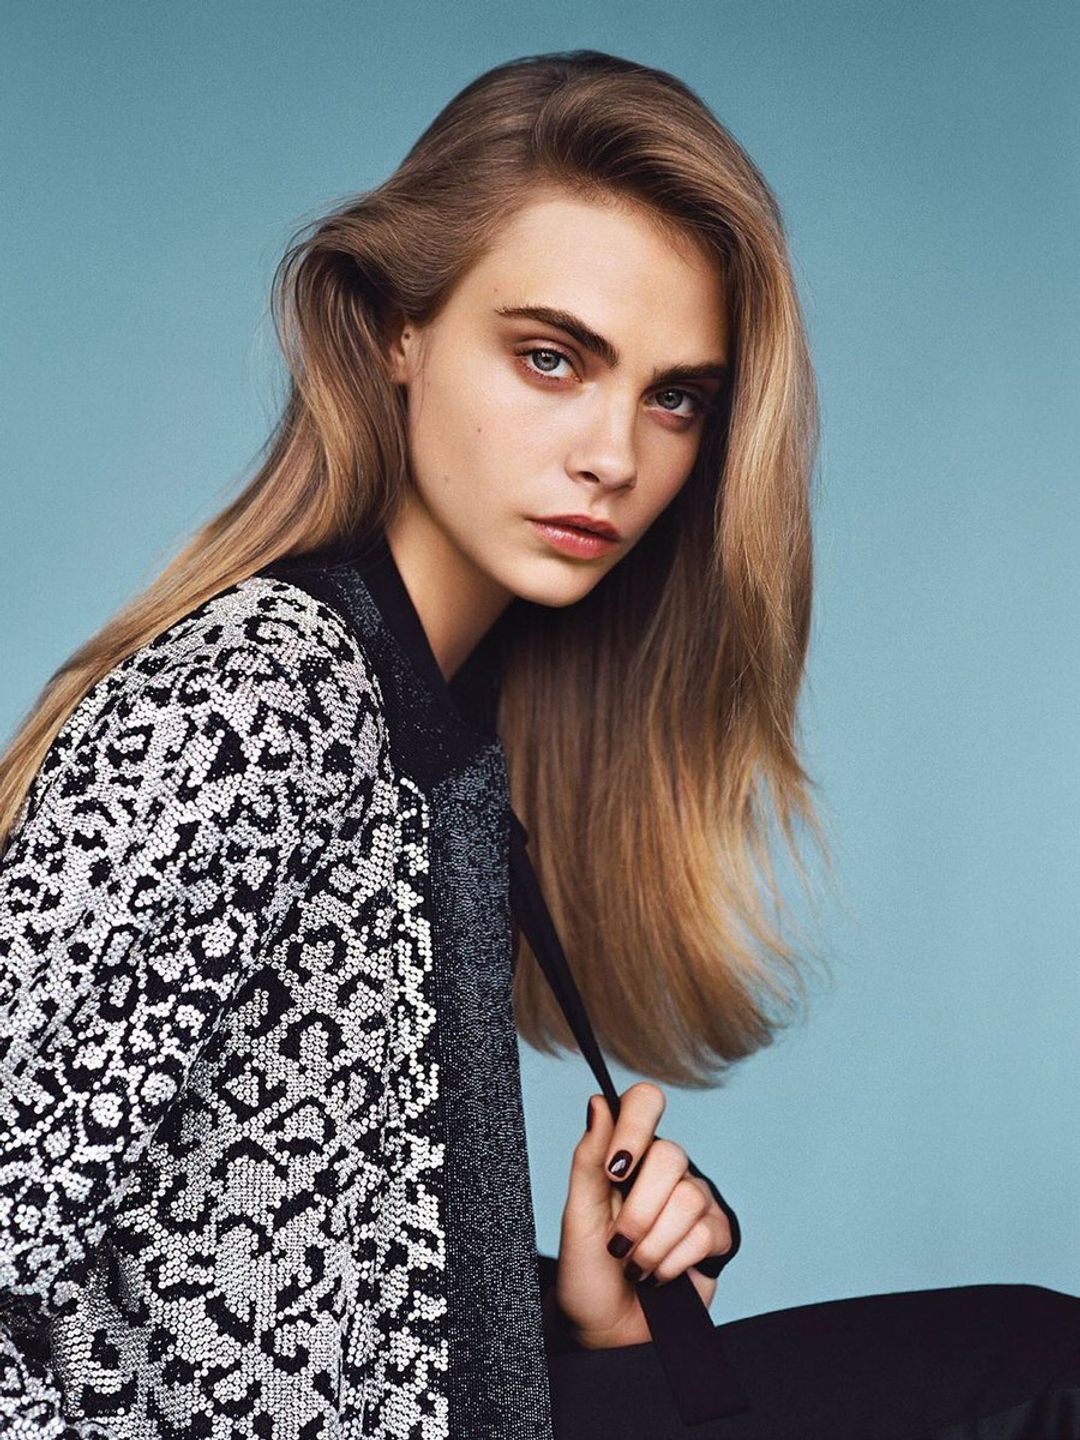 Cara Delevingne early career